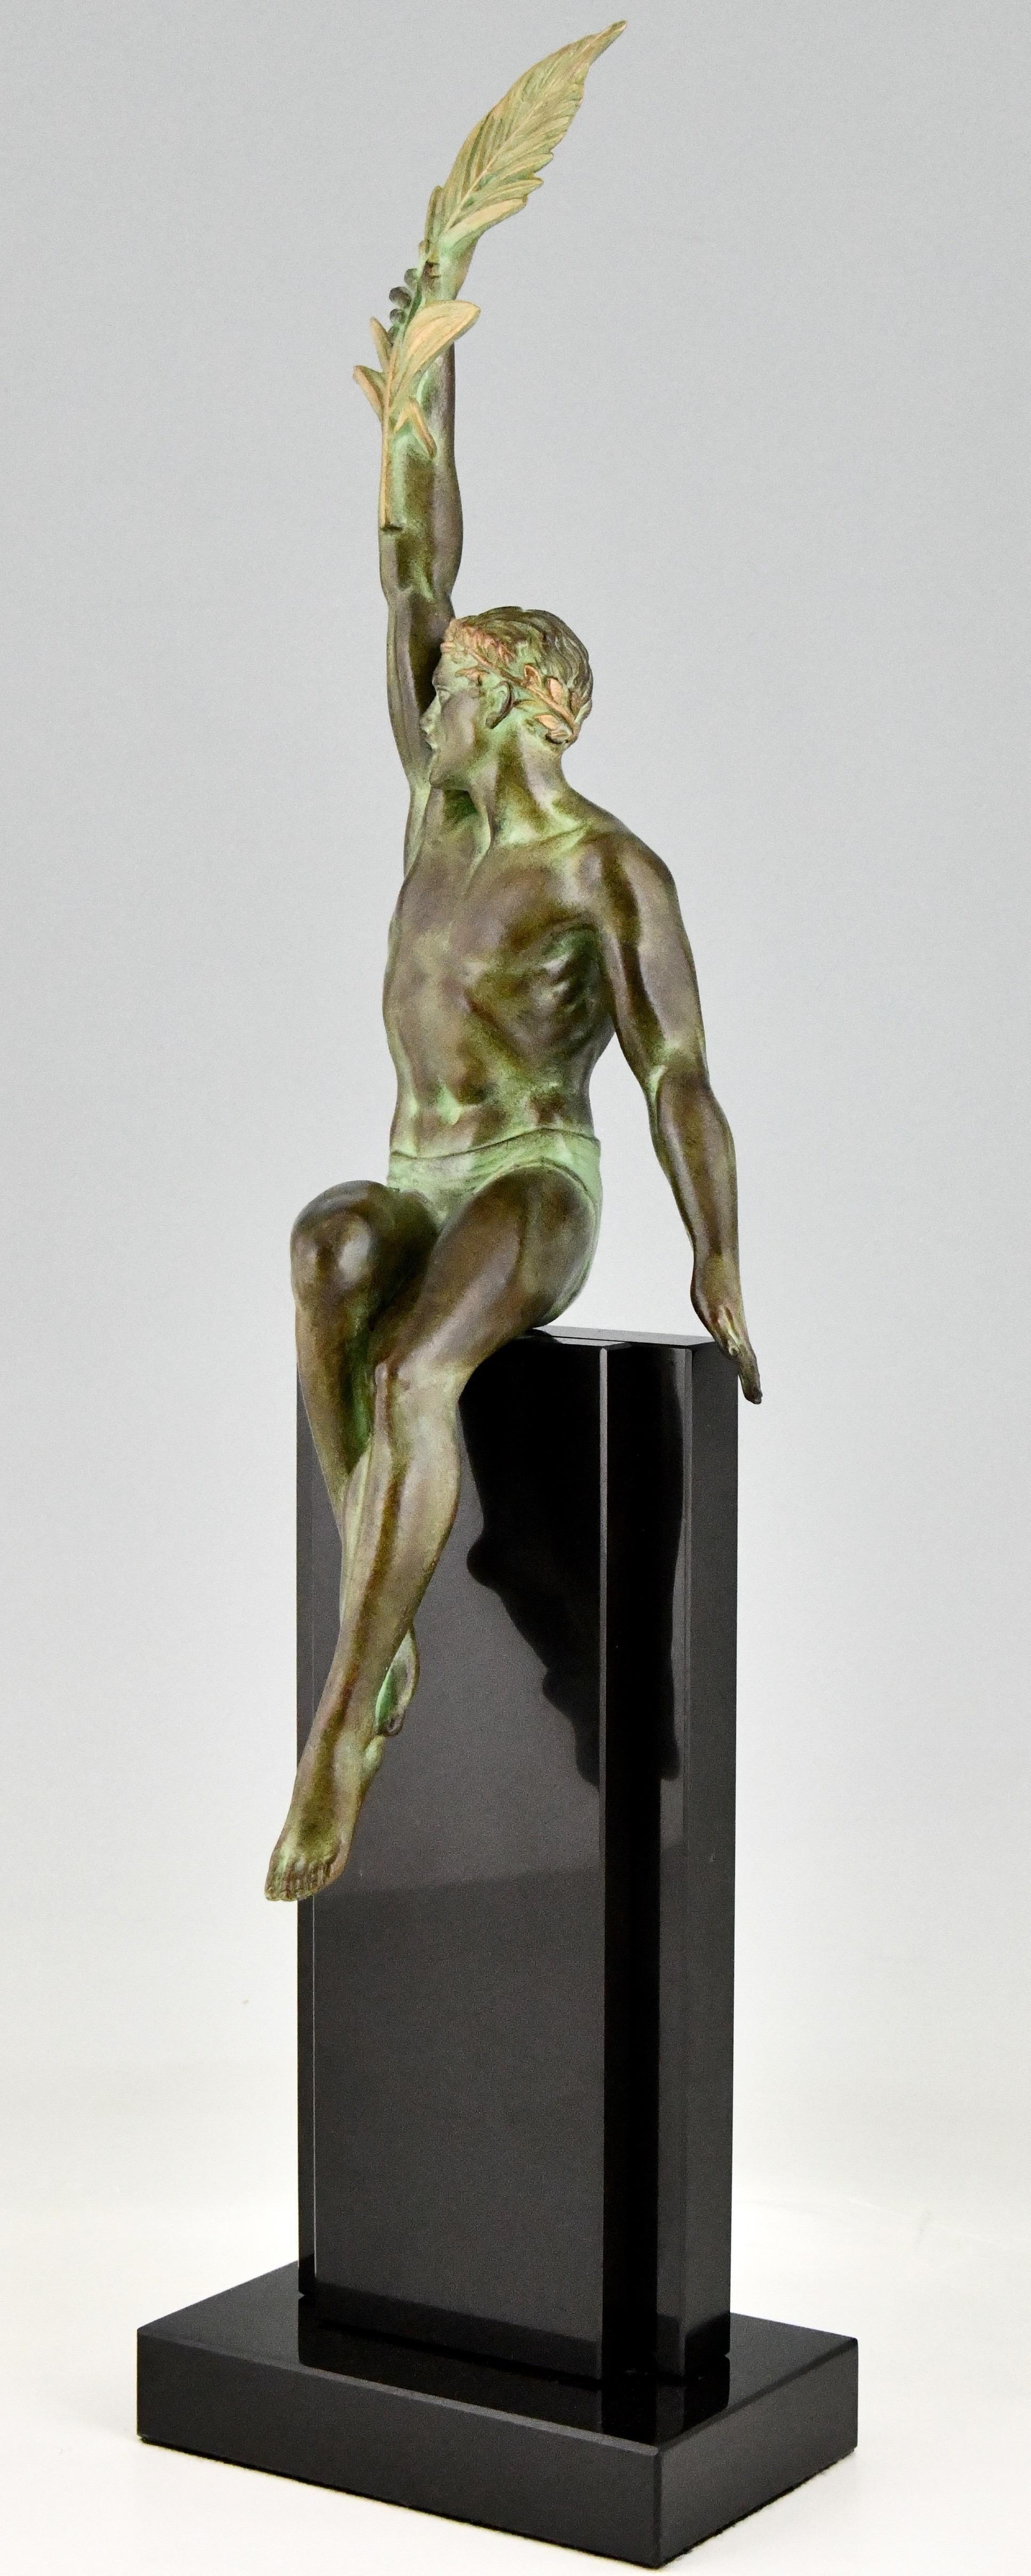 Art Deco Style Sculpture Athlete with Palm Leaf by Max Le Verrier, Victory 1